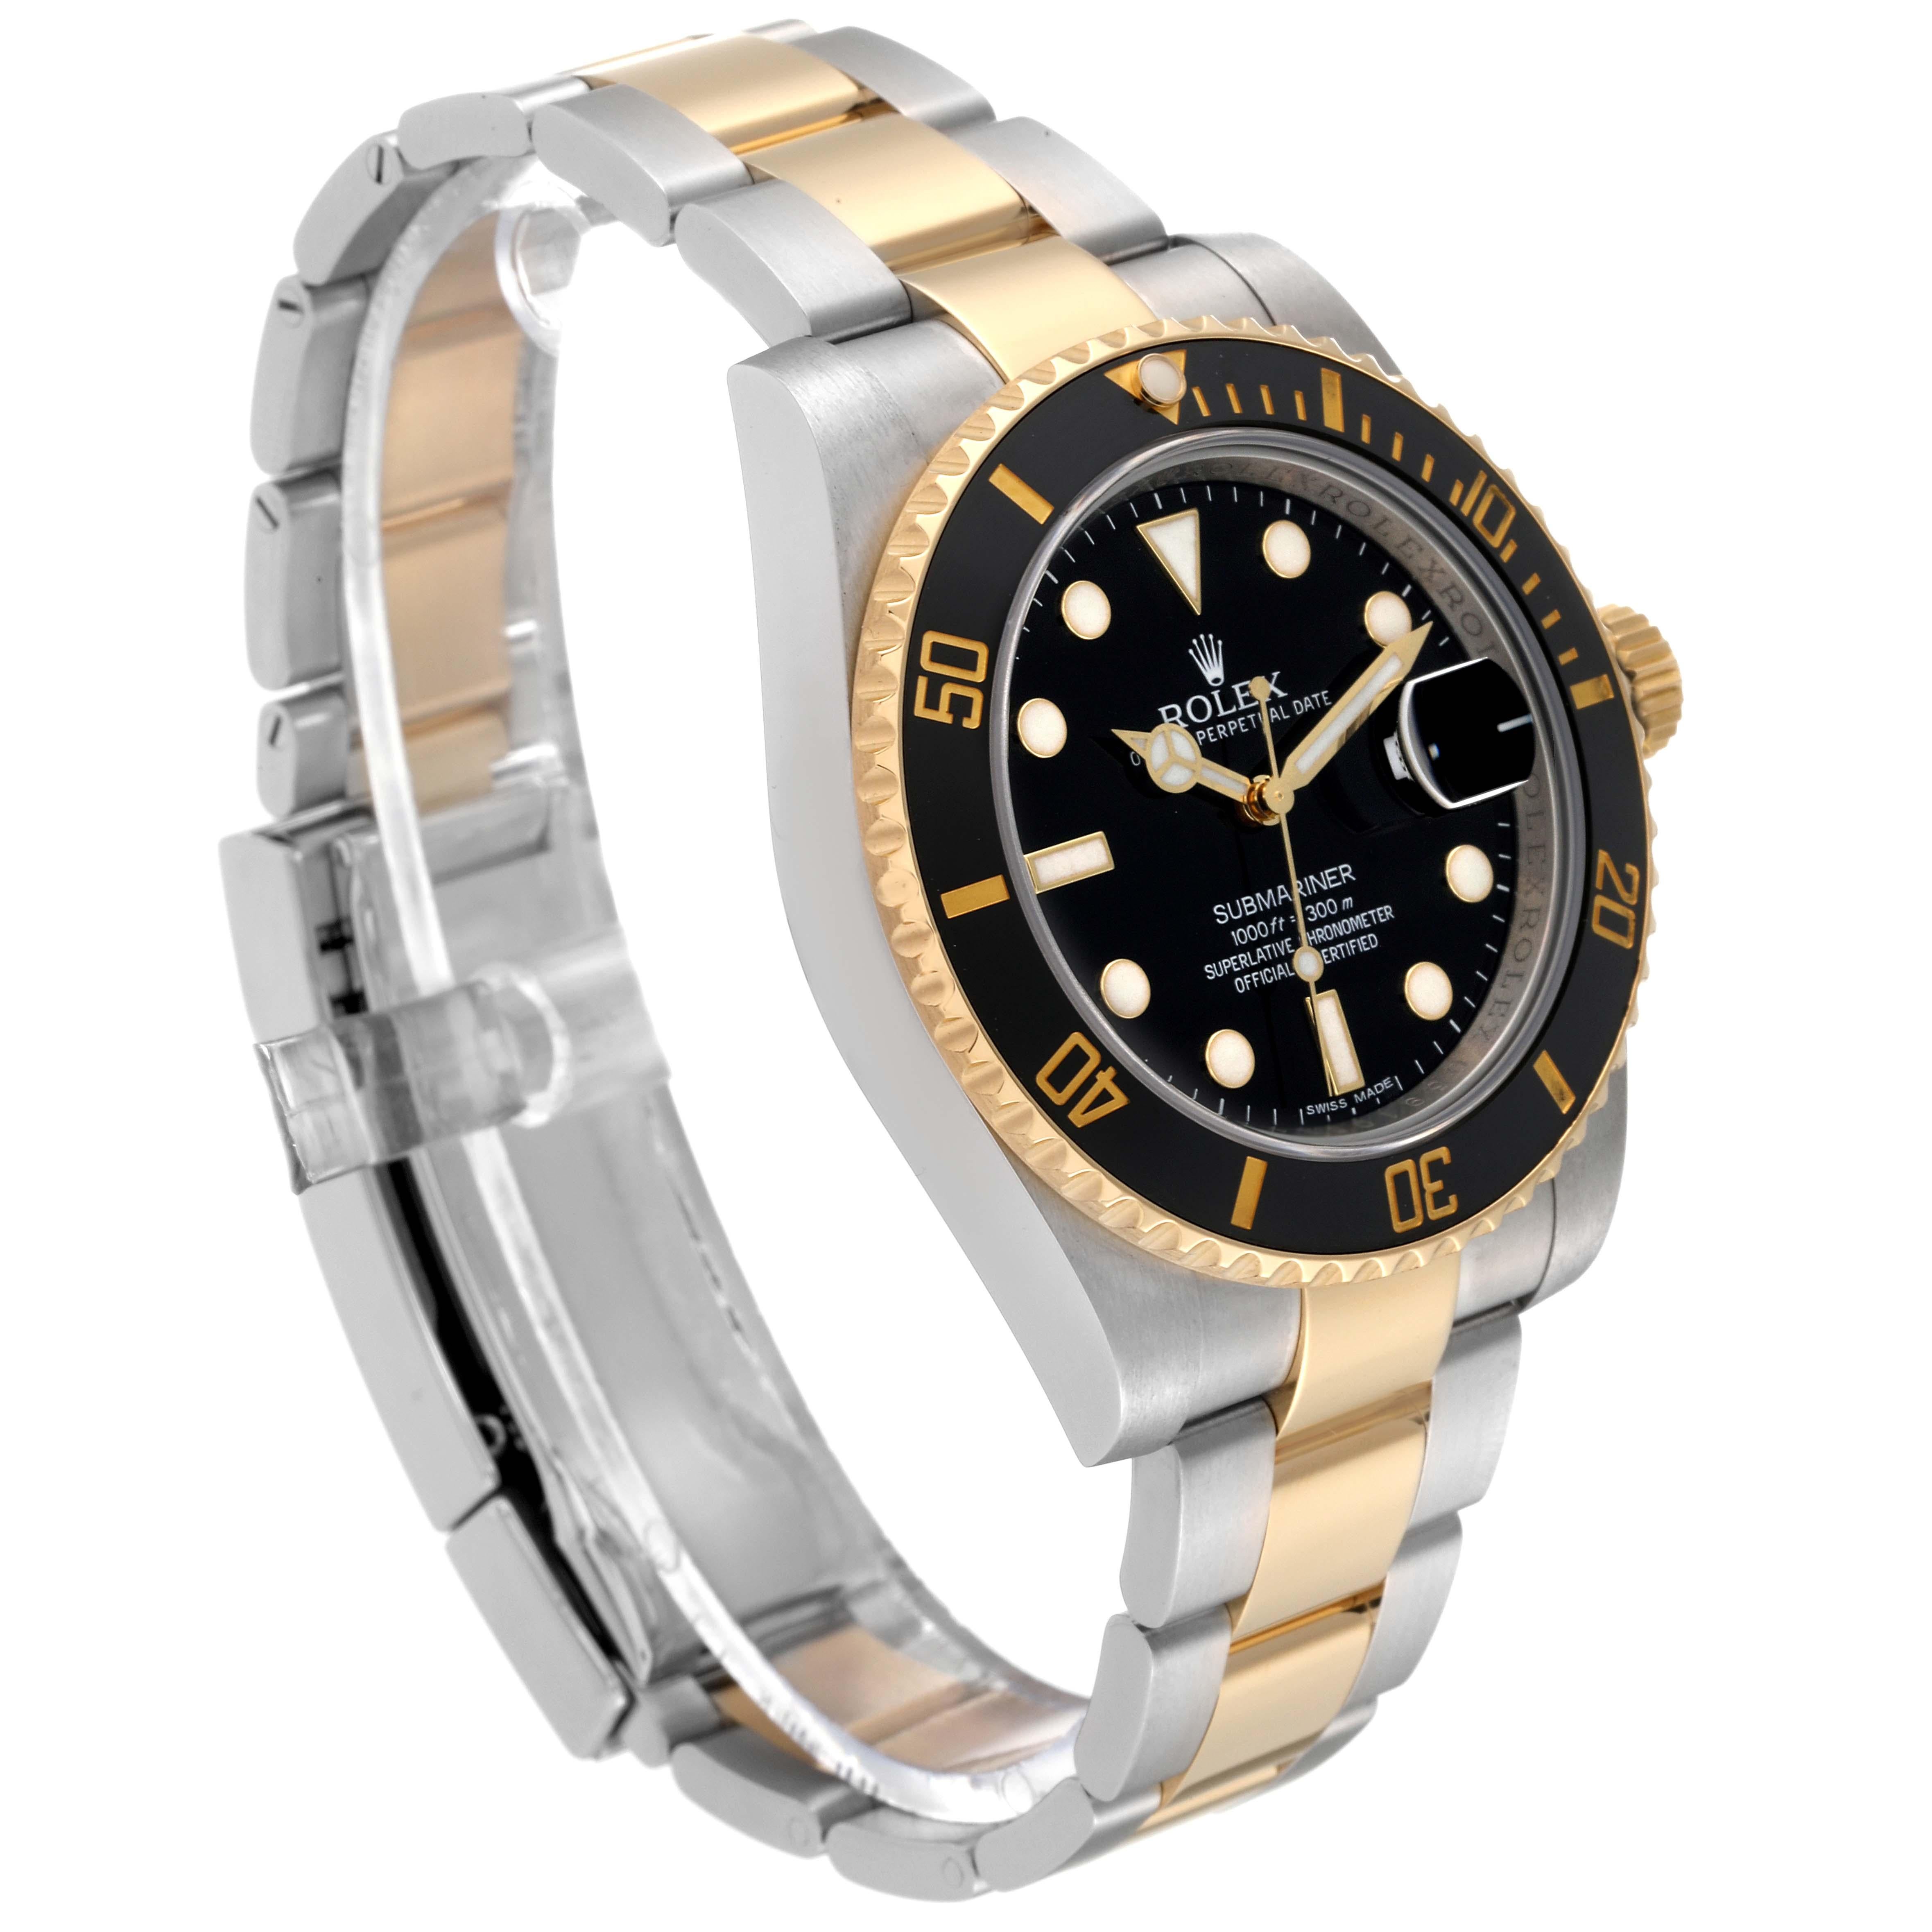 Rolex Submariner Steel Yellow Gold Black Dial Mens Watch 116613 Box Card 3